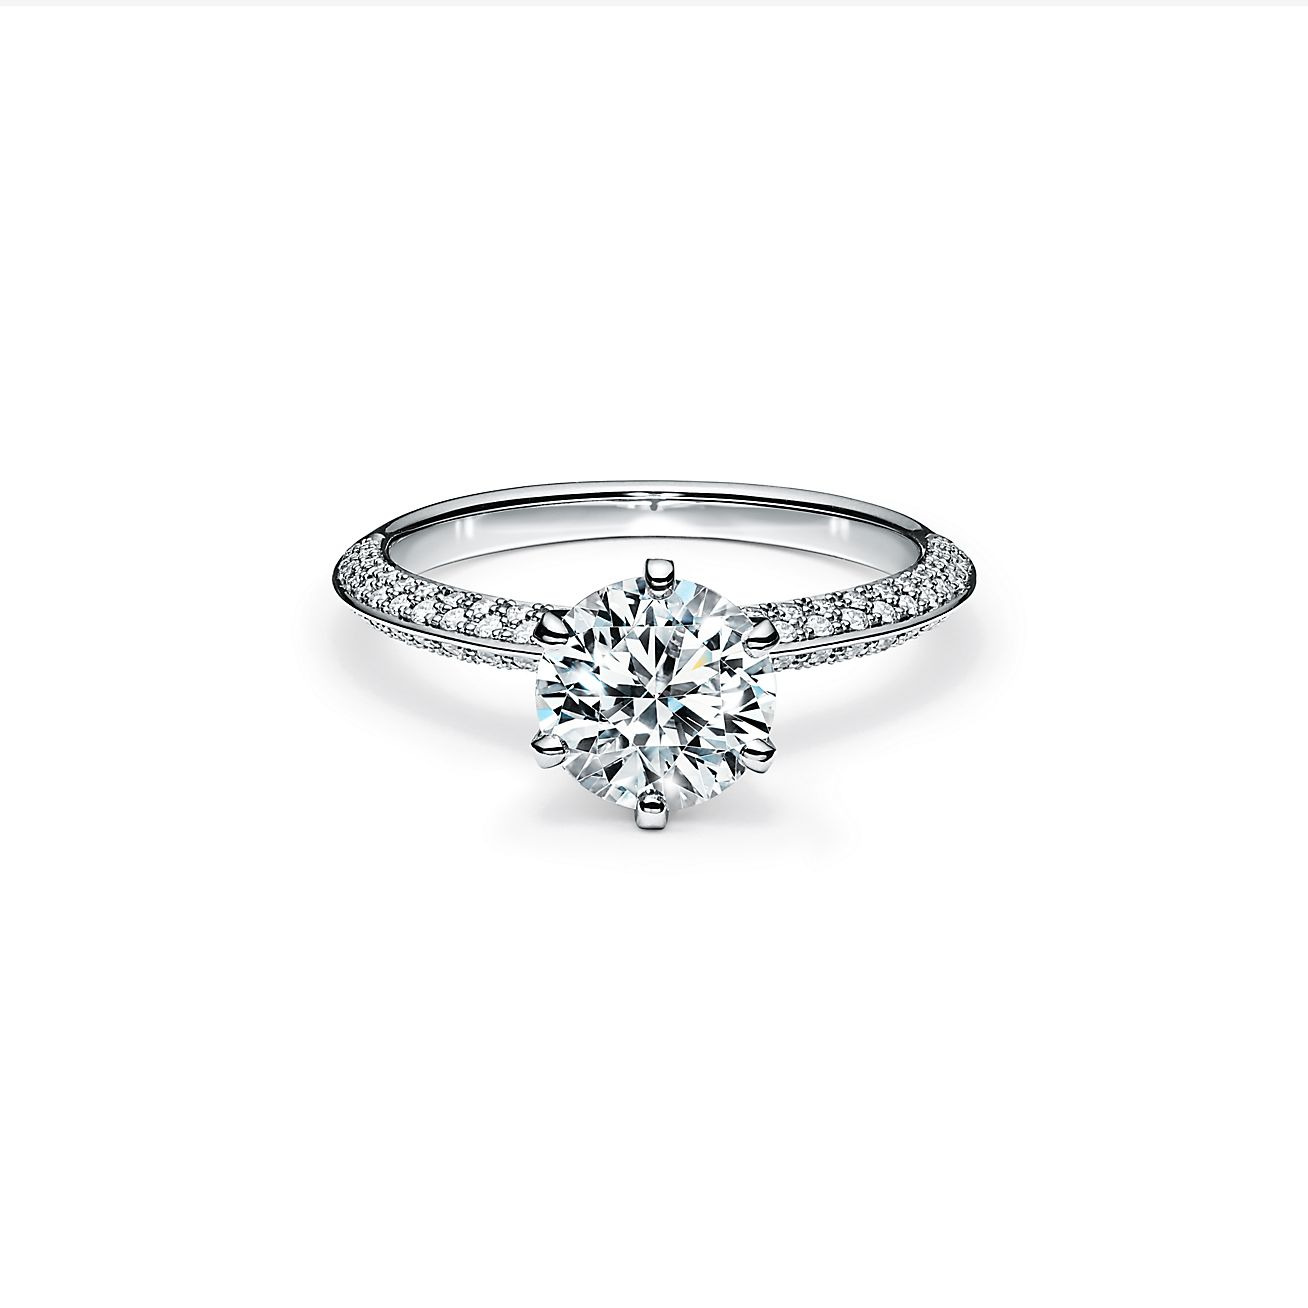 Pavé Tiffany® Setting Engagement Ring with a Pavé Diamond Band in Platinum